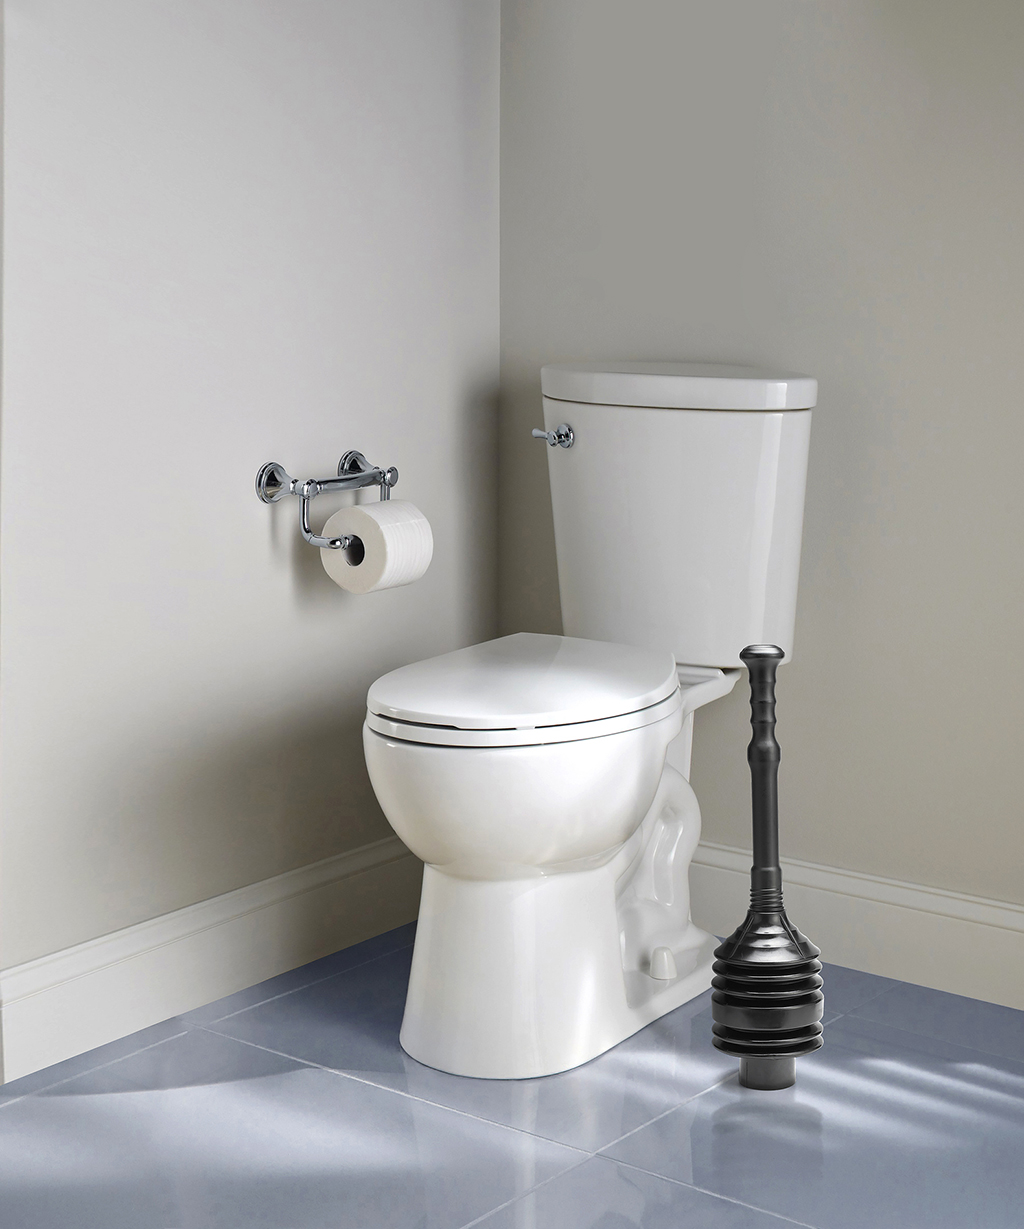 Plumber Tips: How Do I Know When It’s Time To Invest In A New Toilet? | Carrollton, TX